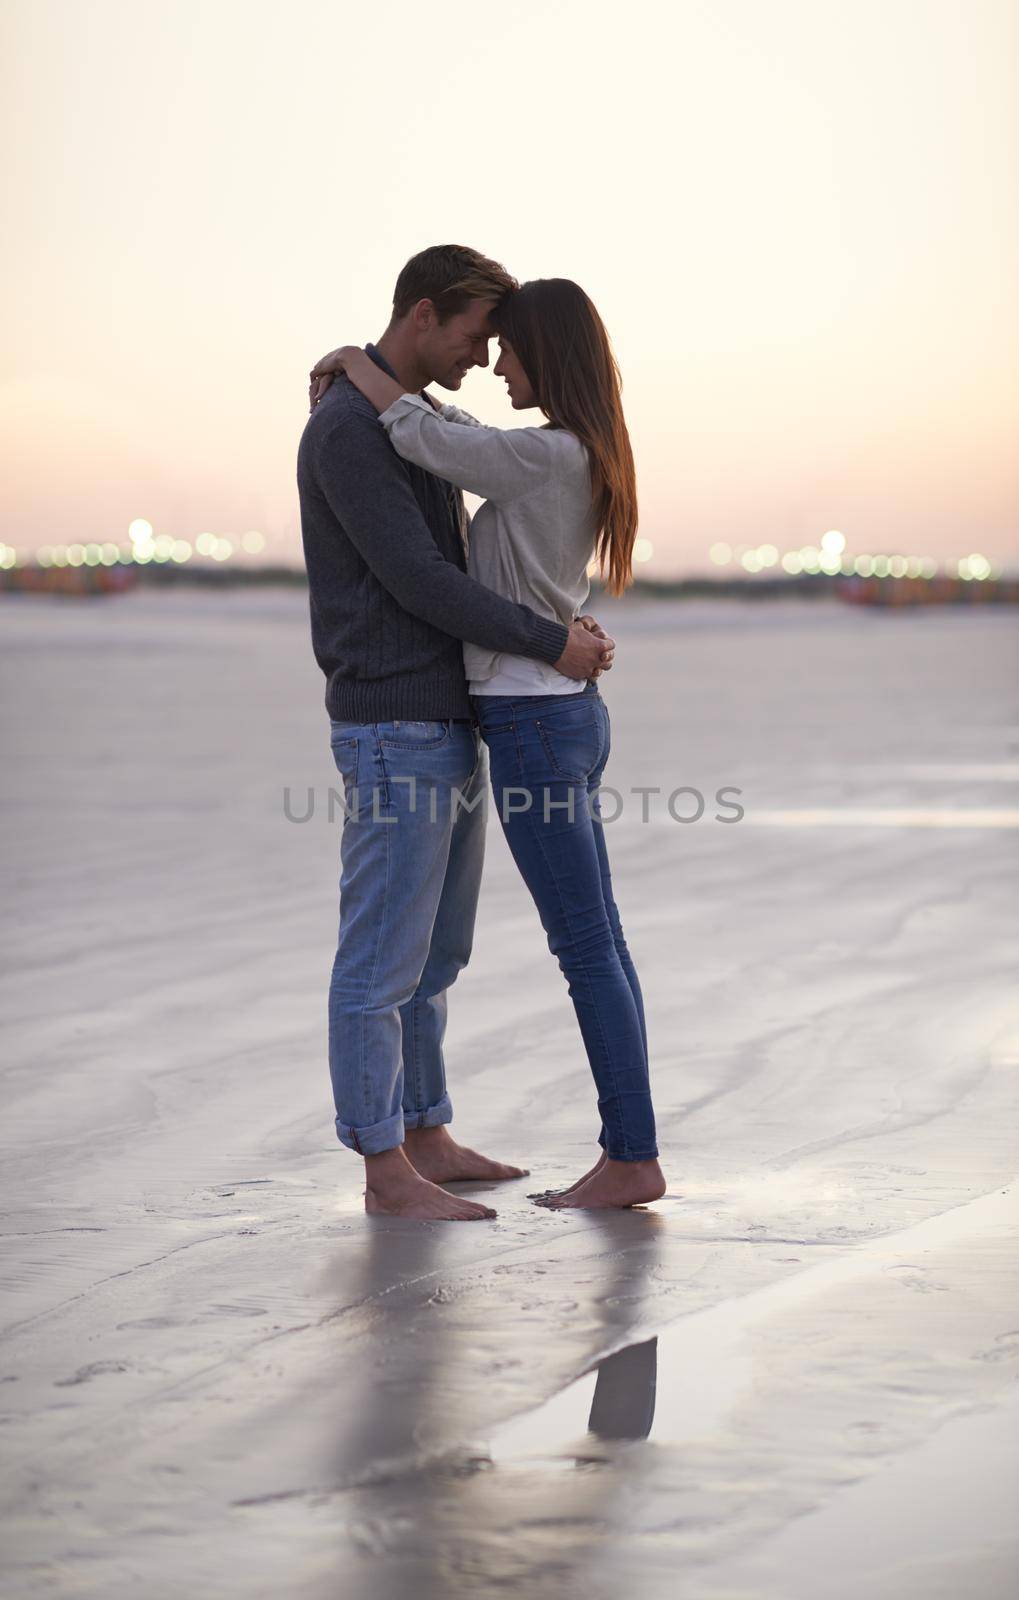 A young couple enjoying a romantic moment together at the beach.